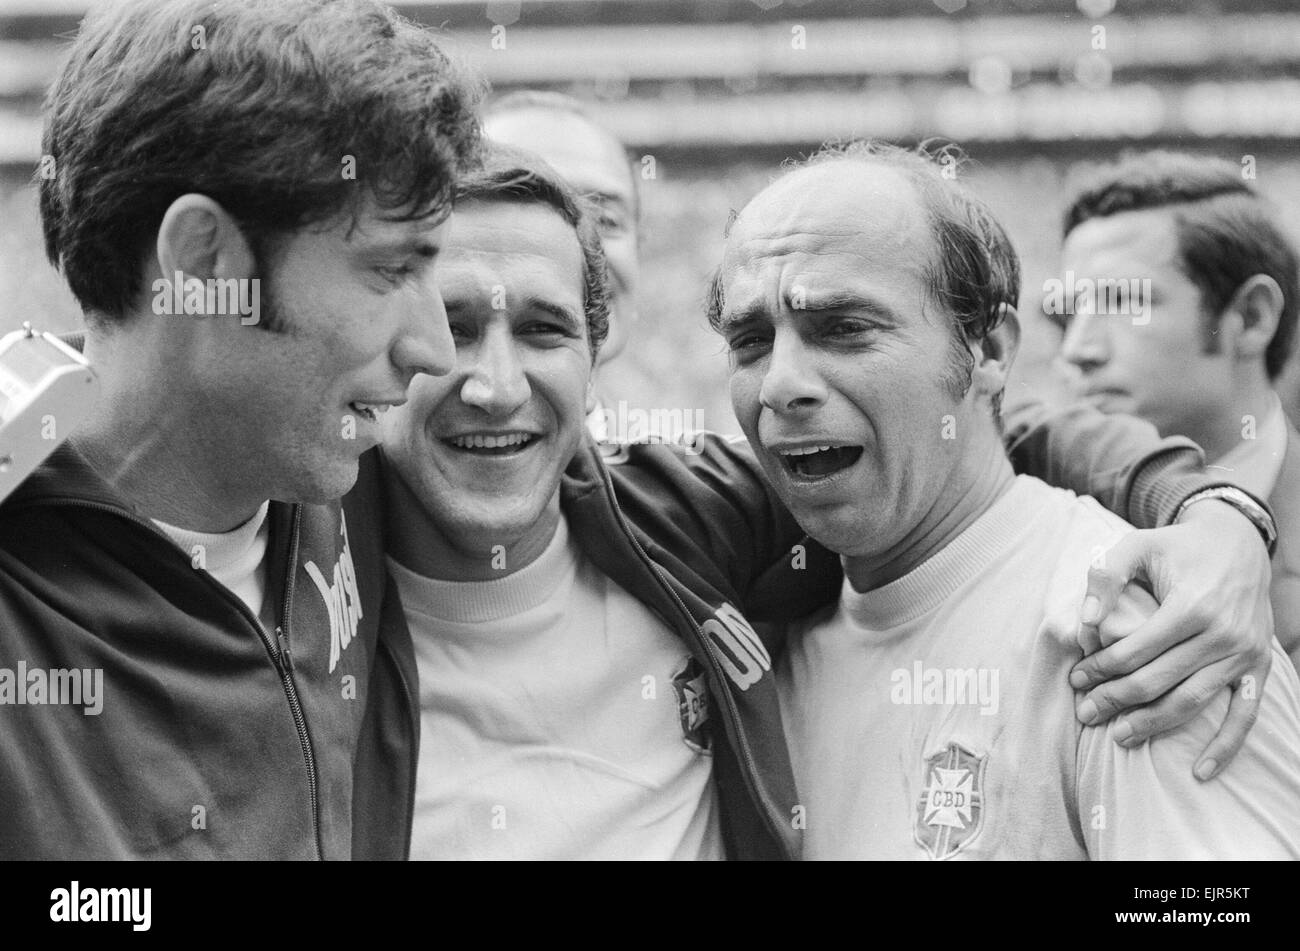 1970 World Cup Final at the Azteca Stadium in Mexico. Brazil 4 v Italy 1. Brazil's team physical fitness trainer Admildo Chirol in tears after the match. 21st June 1970. *** Local Caption *** Stock Photo